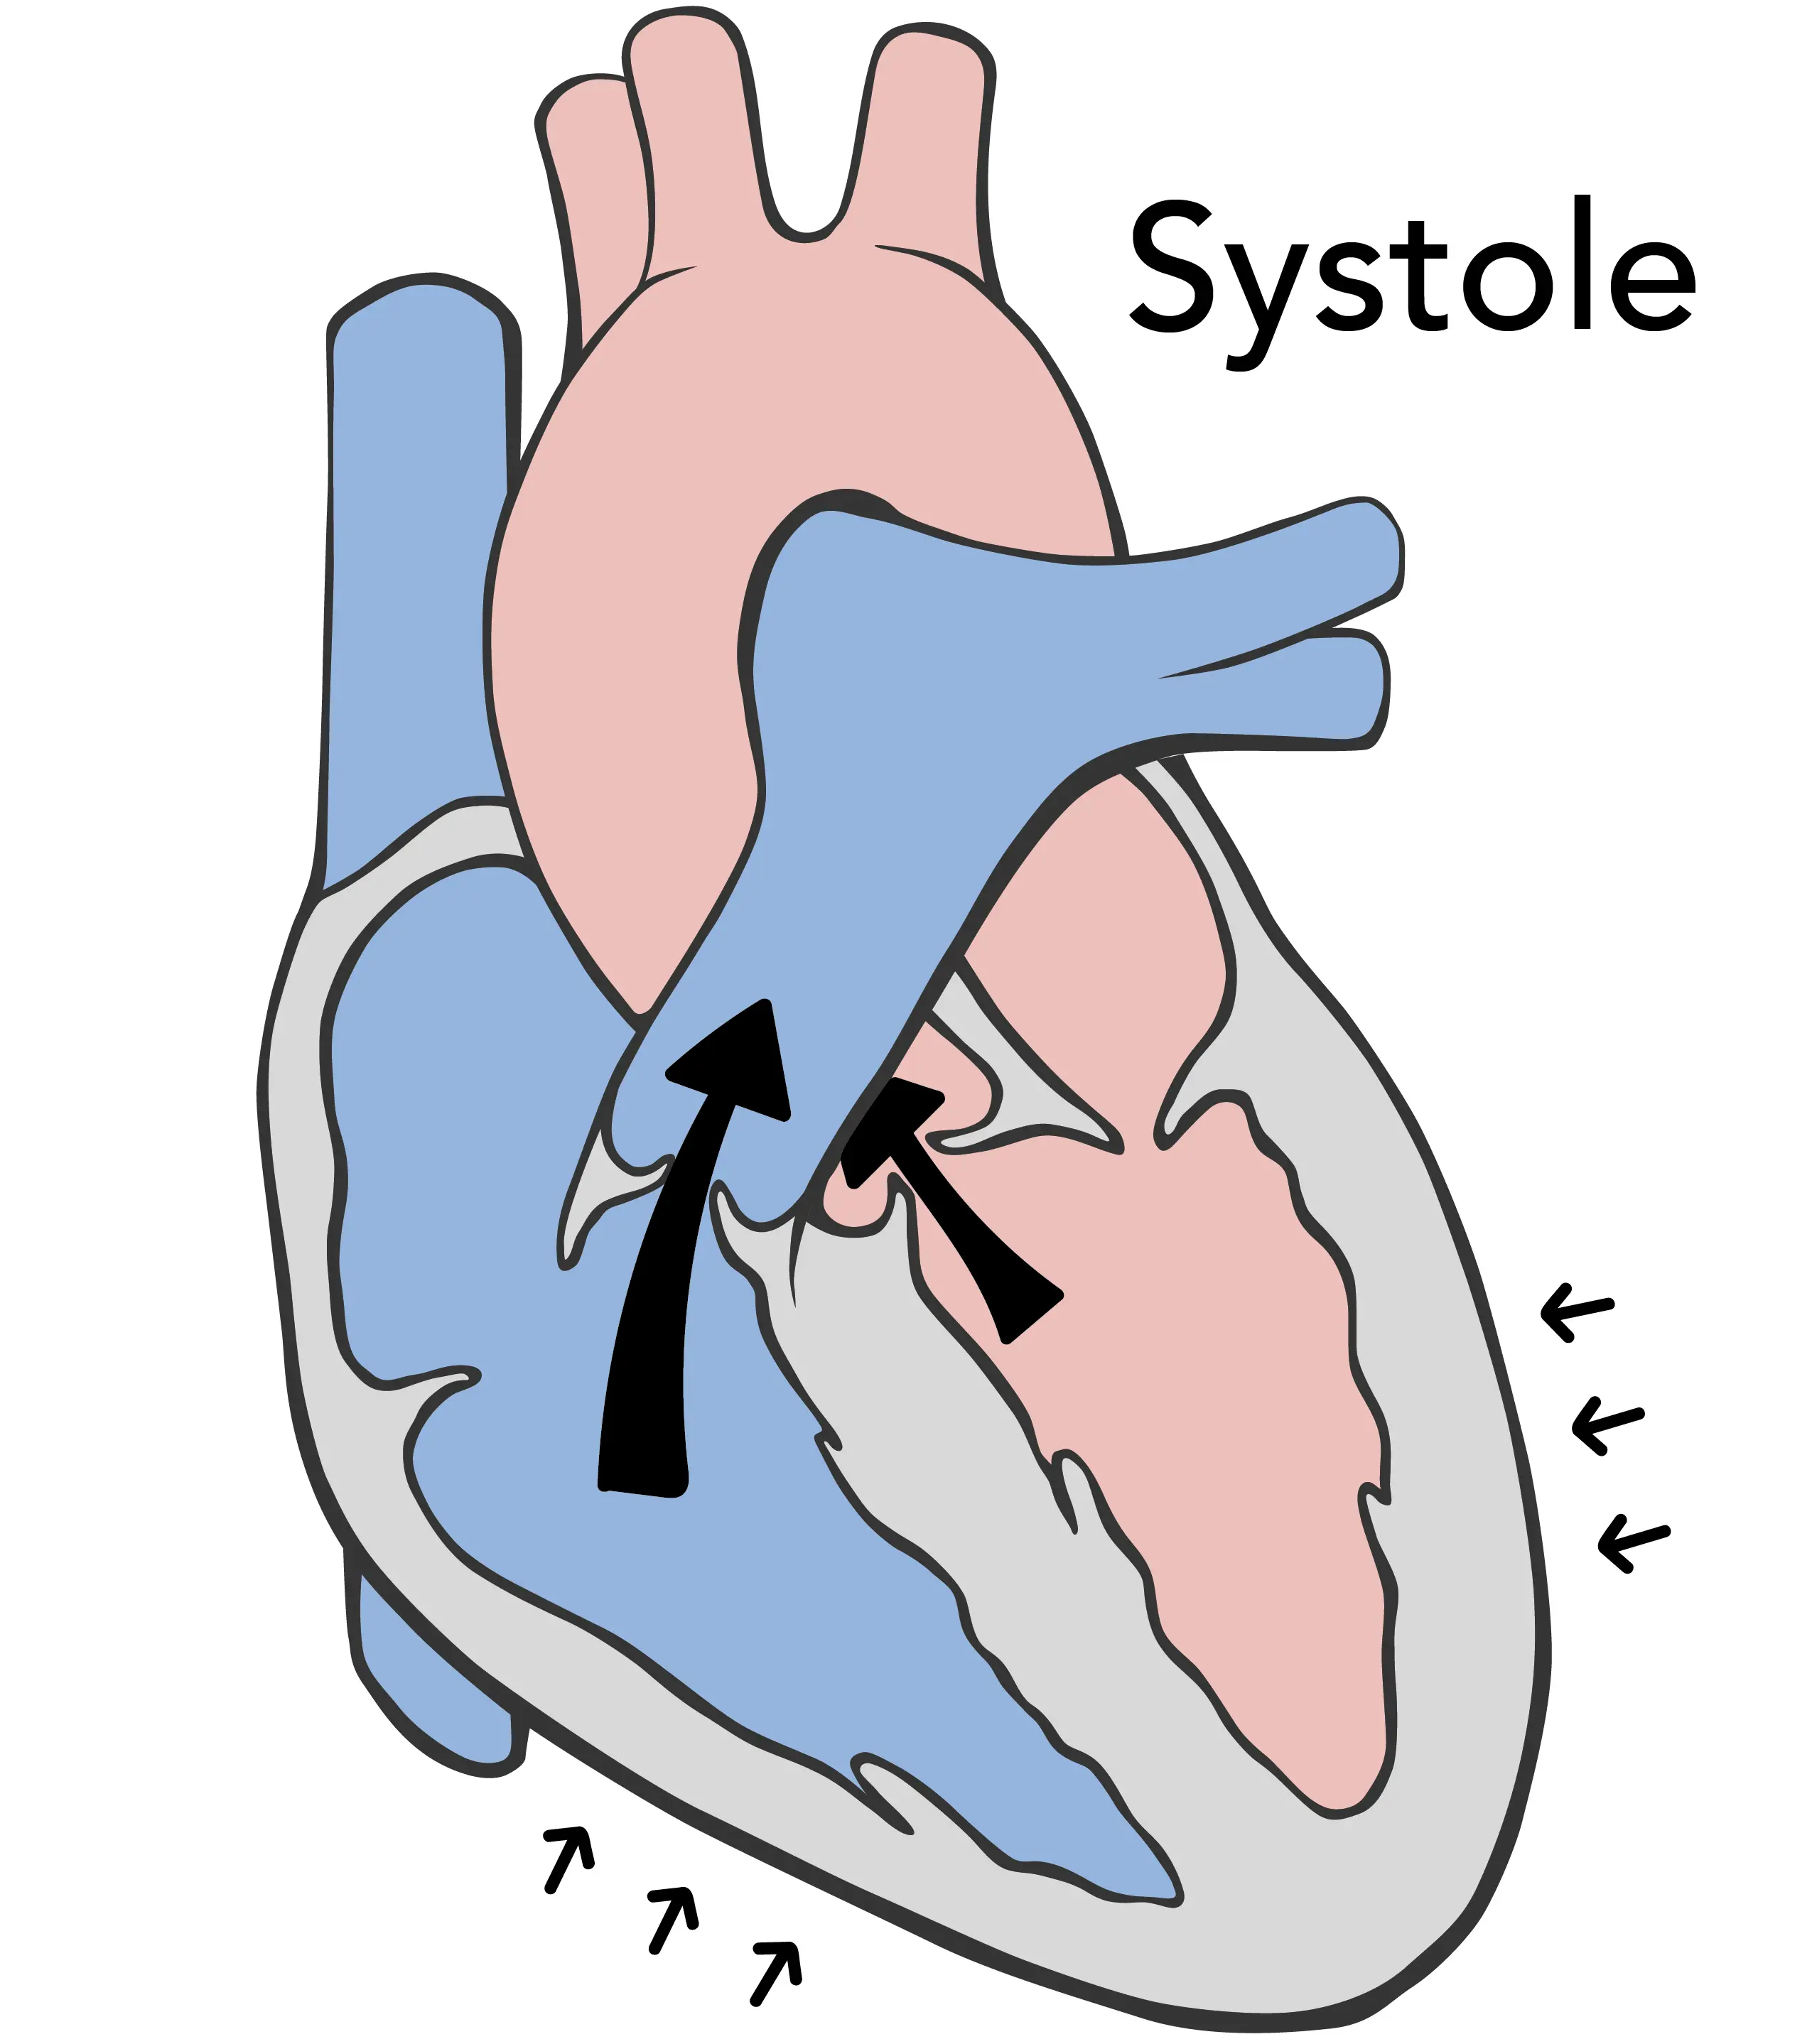 During the systole phase the heart muscle contracts, the heart chambers shrink and the blood is ejected.